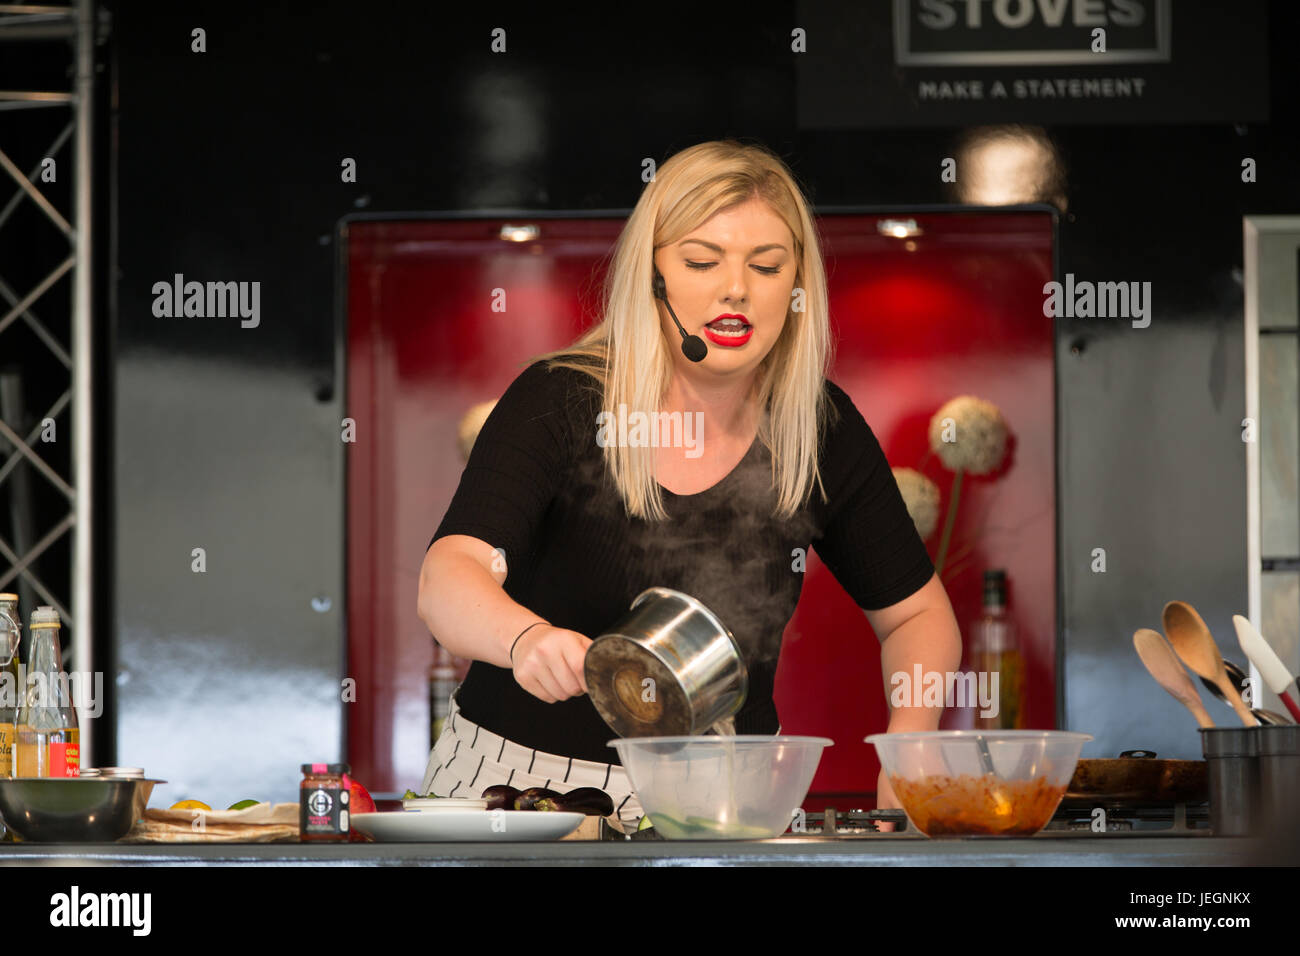 Birmingham, UK. 25th Jun, 2017. Lorna Robertson a Masterchef finalist doing a cooking demo on the Stoves cooking stage and talking about her future plans Credit: steven roe/Alamy Live News Stock Photo